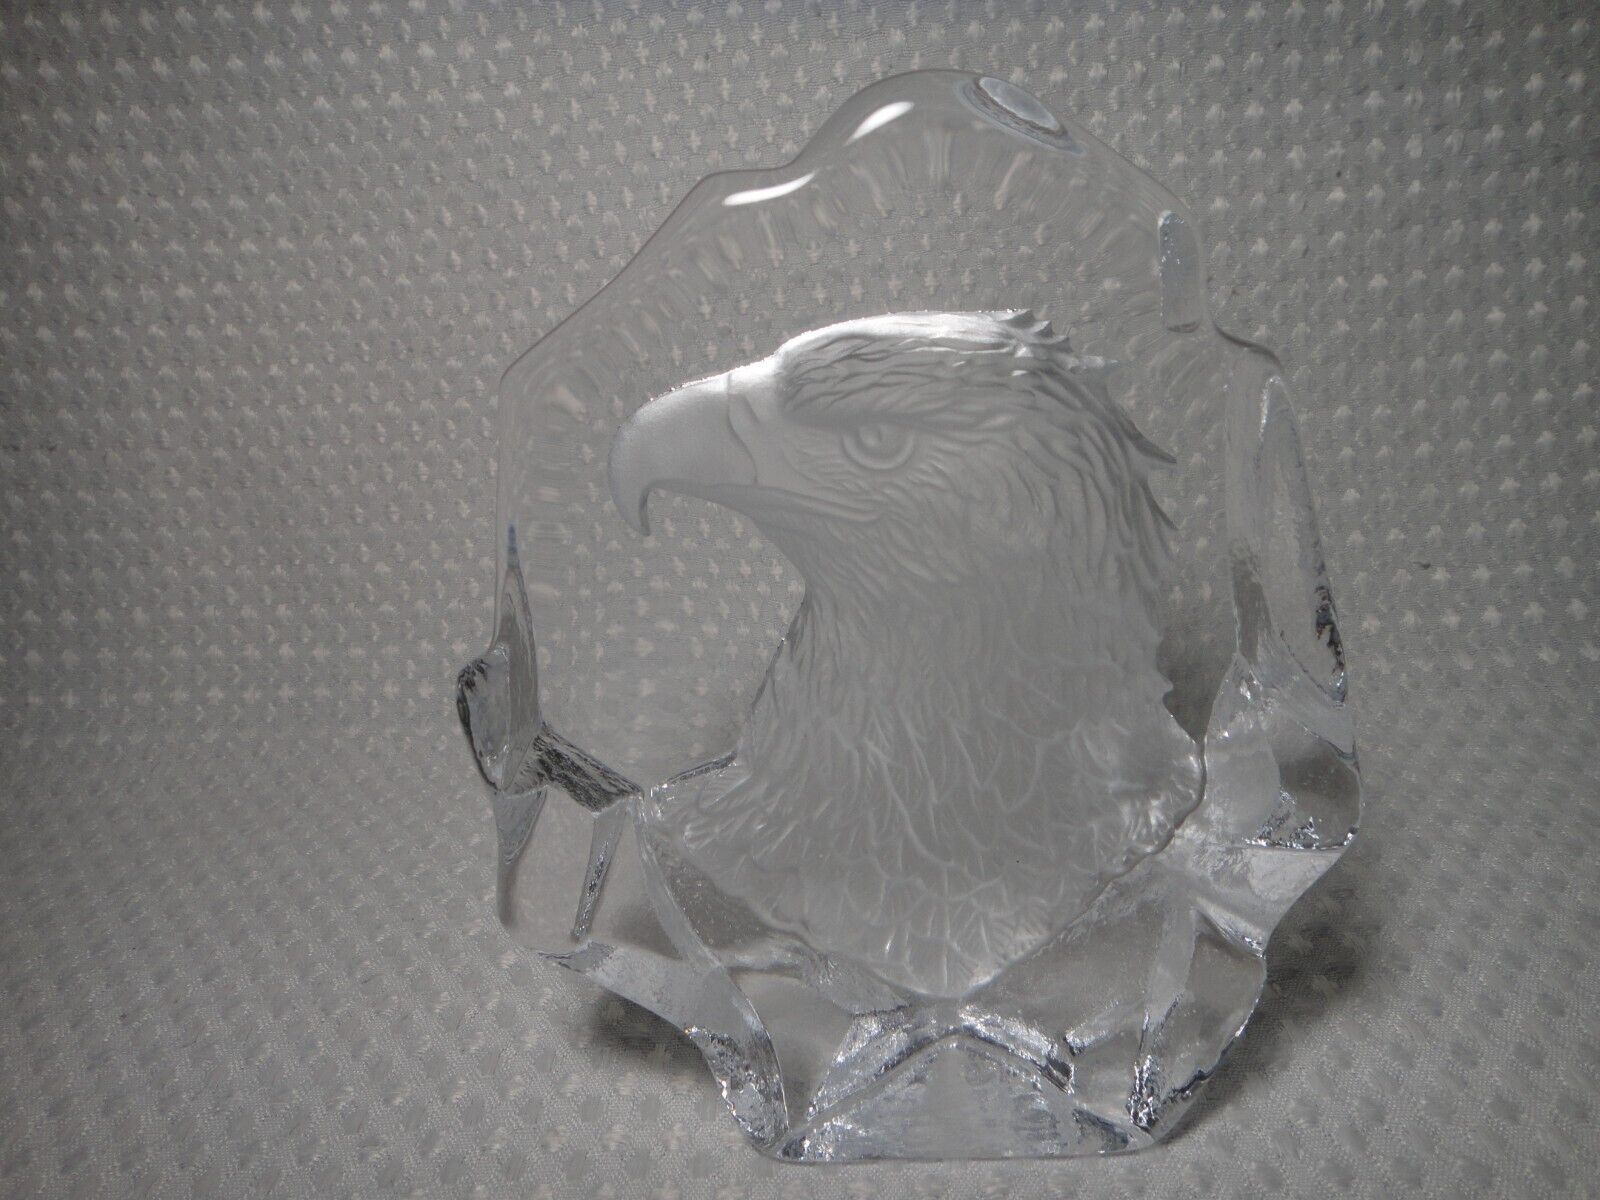 American Bald Eagle Head Etched Crystal Glass Sculpture Art Carved Paperweight